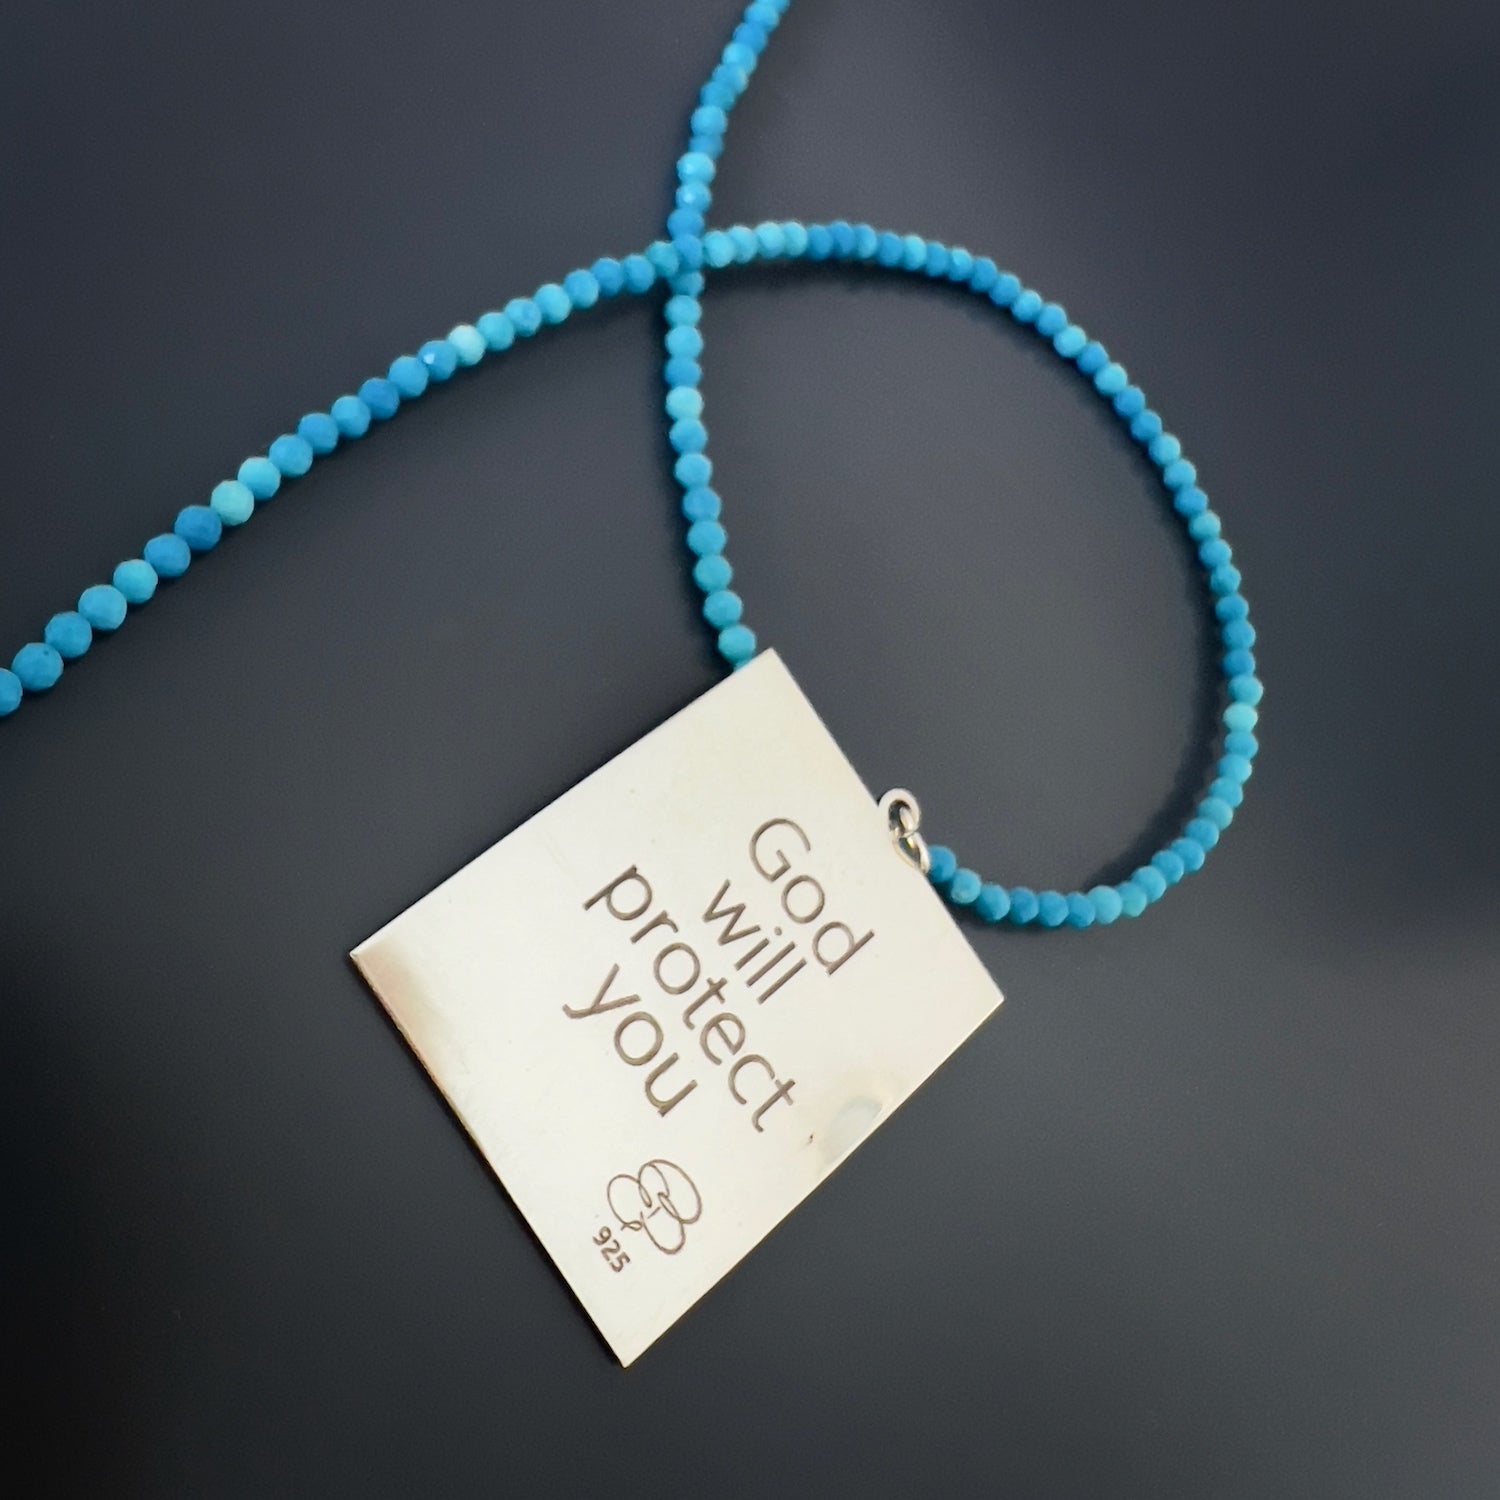 A detailed view of the meaningful inscription on the pendant of the Turquoise Necklace